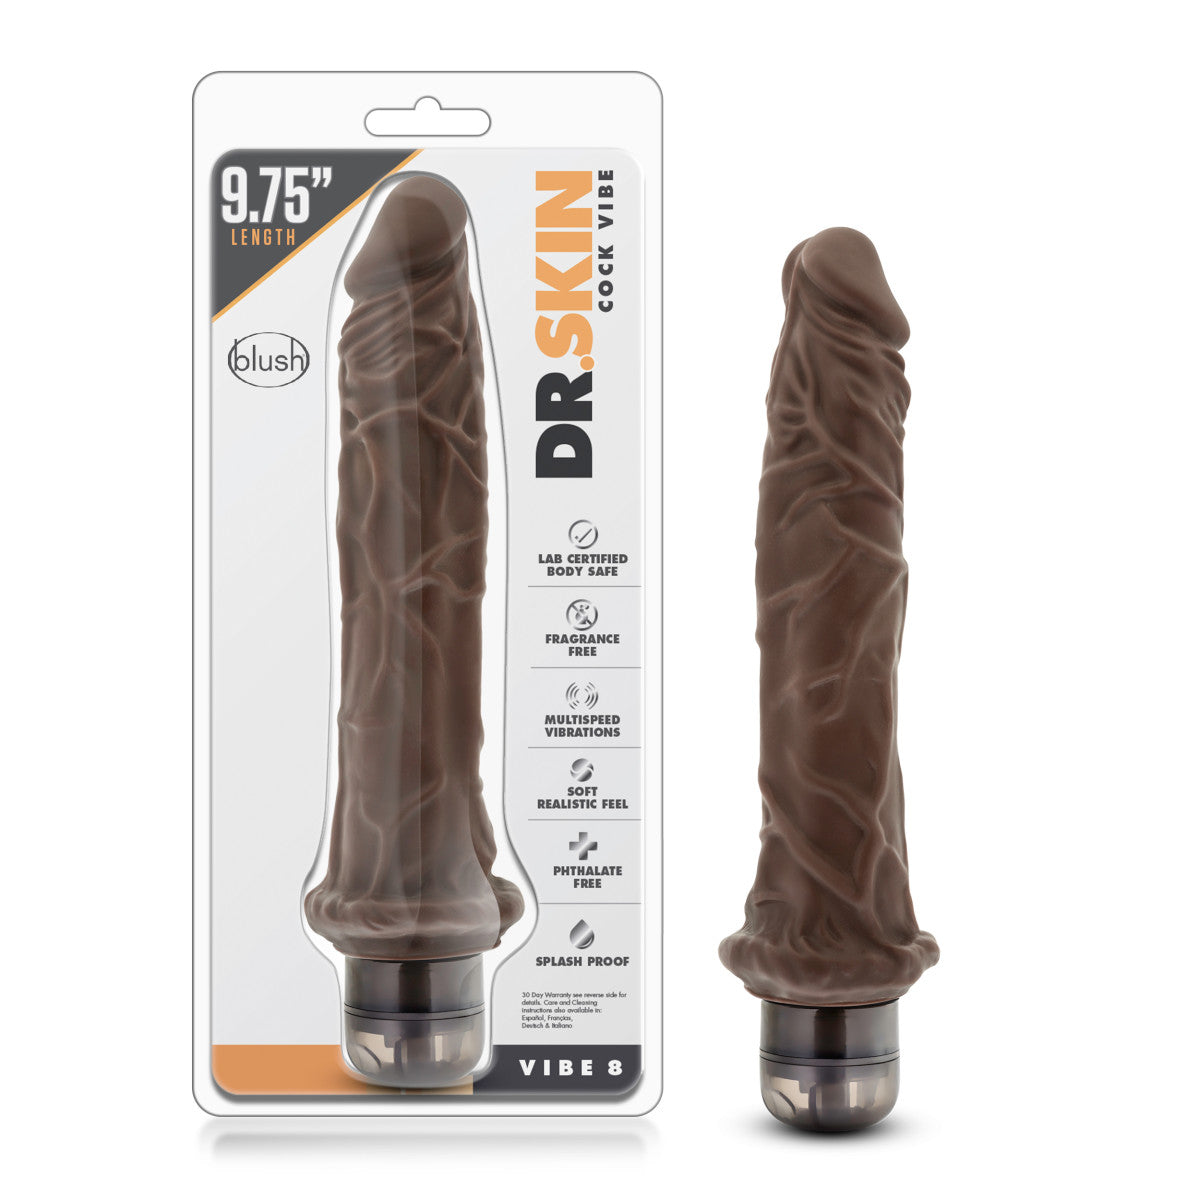 Dr. Skin - Cock Vibe 8 - 9.75 Inch Vibrating Cock - Chocolate